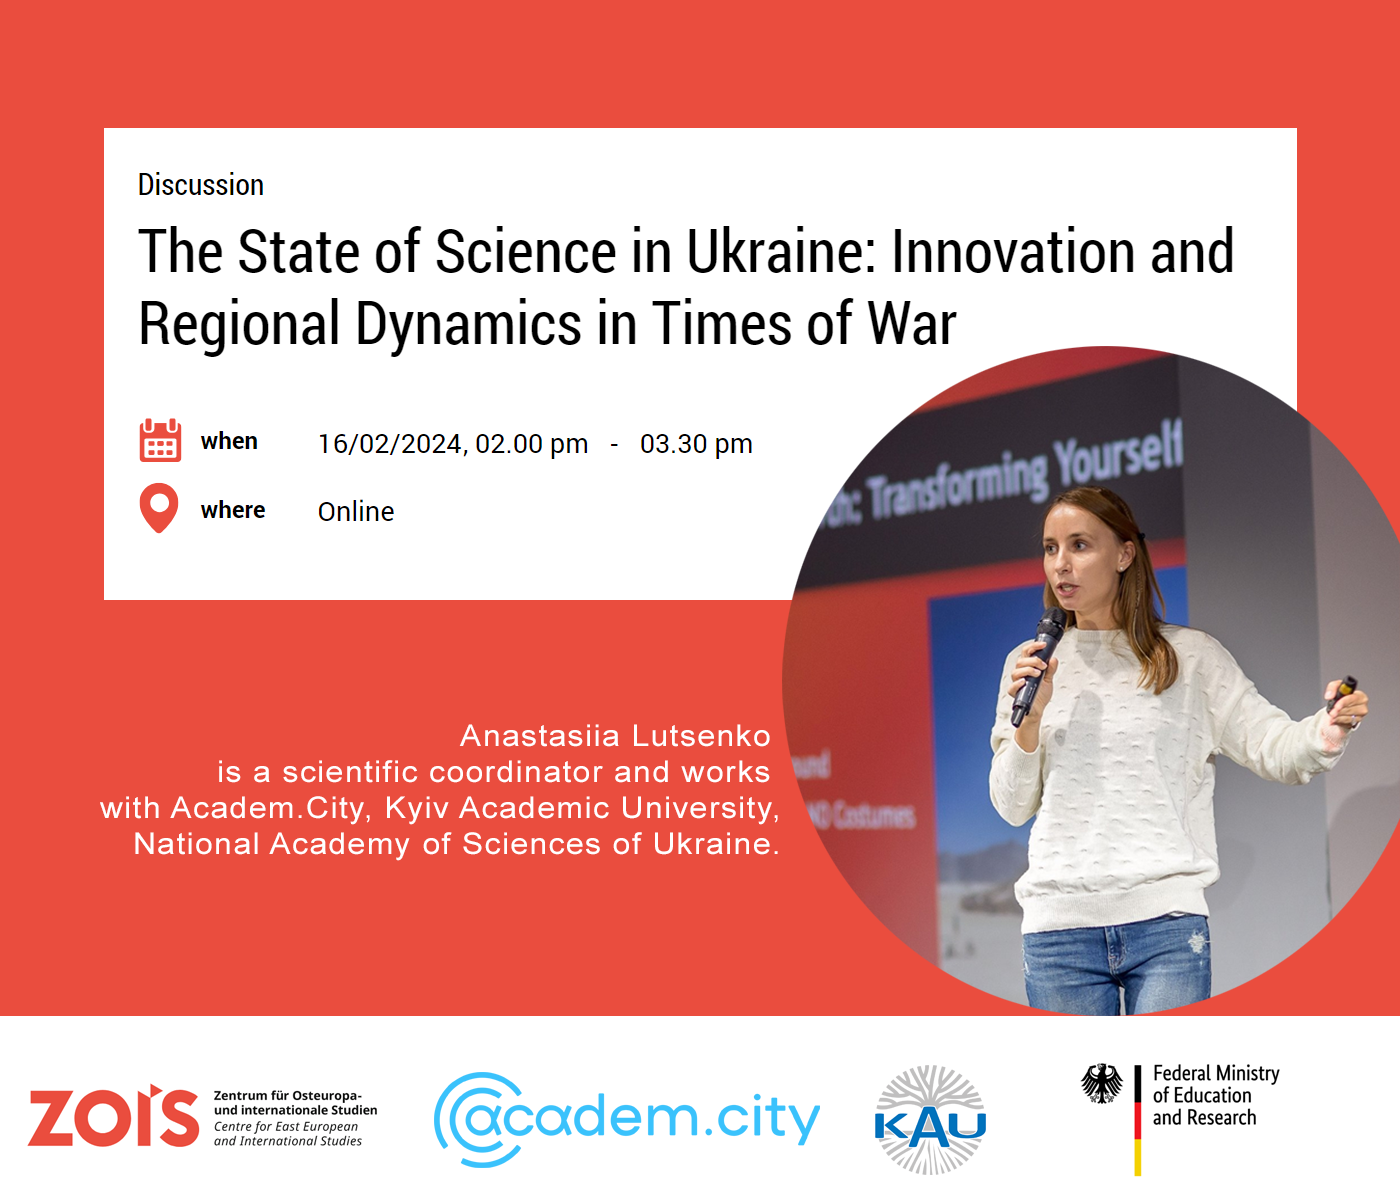 The State of Science in Ukraine: Innovation and Regional Dynamics in Times of War